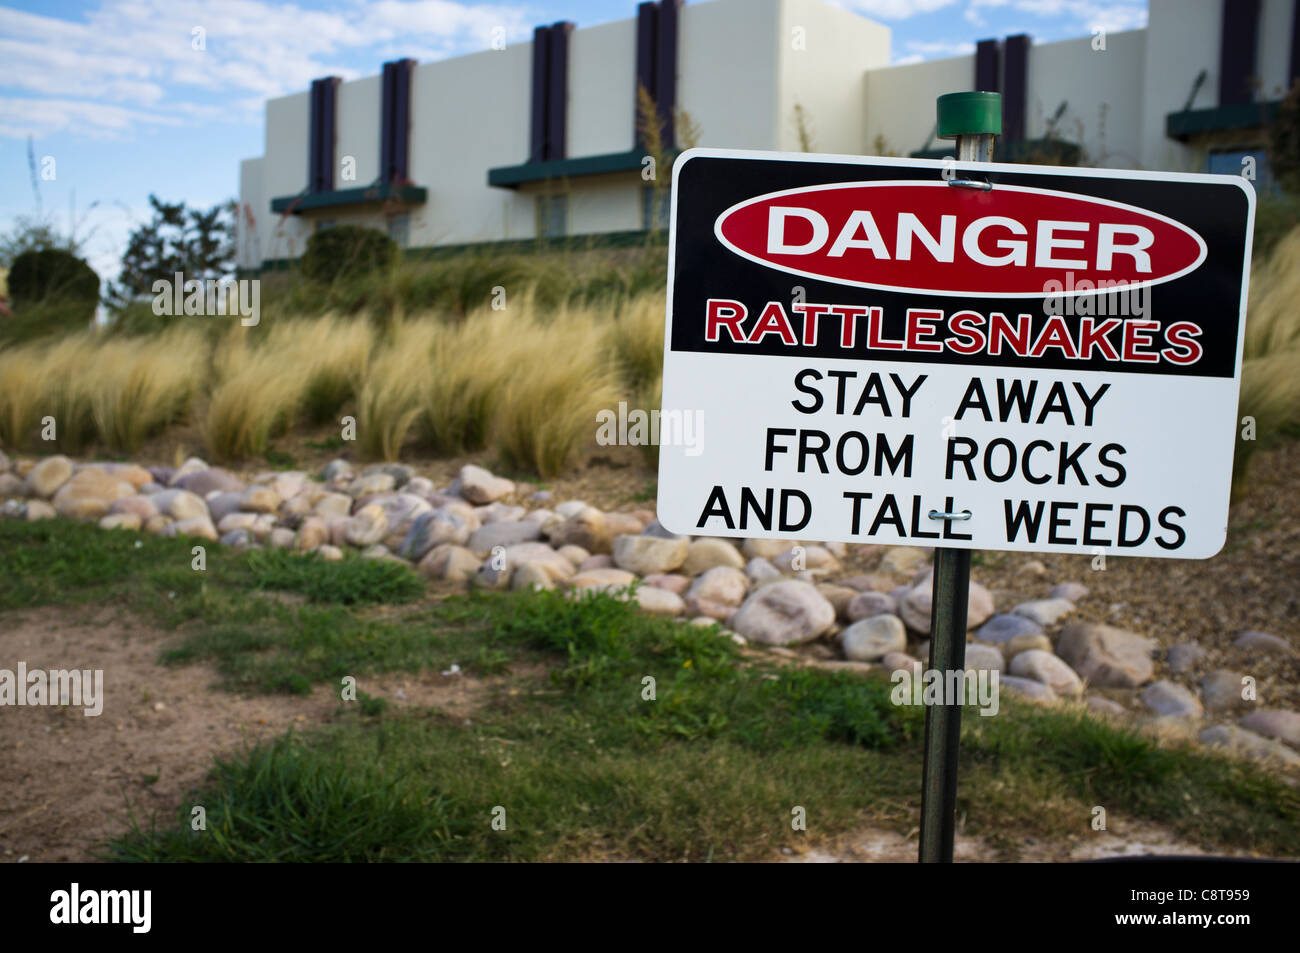 Sign at a Texas route 40 rest stop ' Danger Rattlesnakes Stay away from rocks and tall weeds' Stock Photo